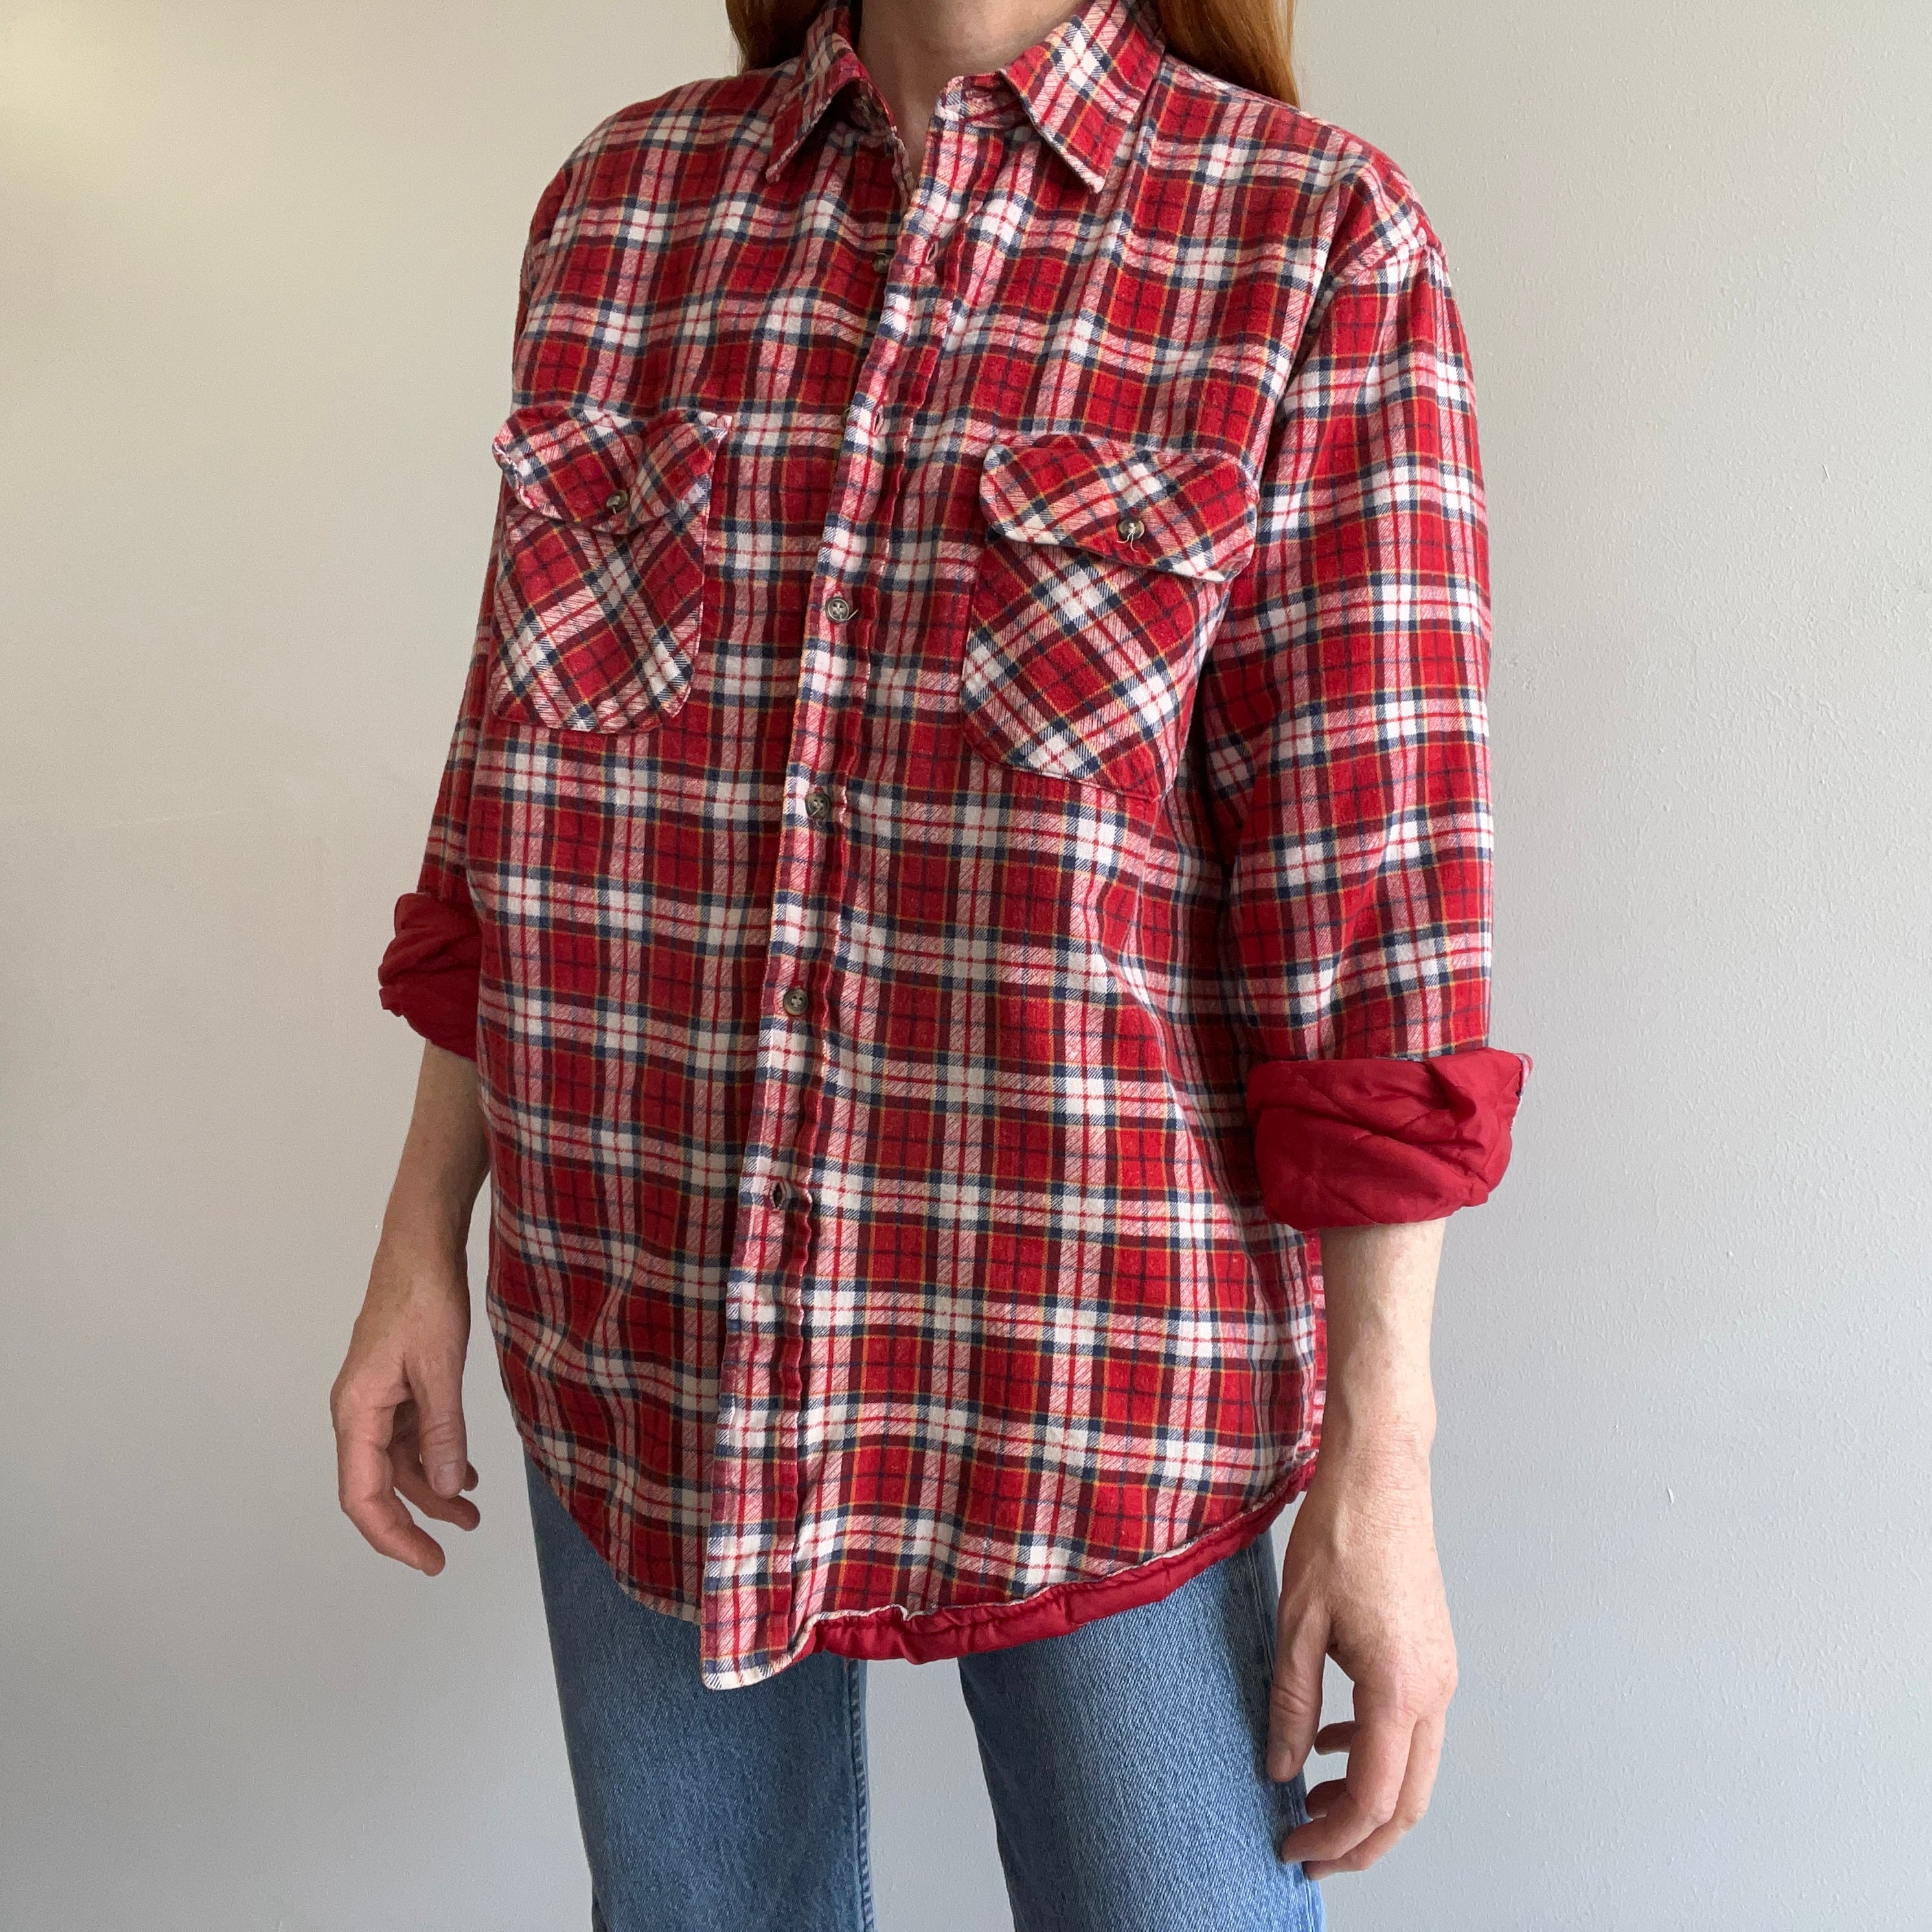 1980s Insulated Flannel by Outdoor Exchange